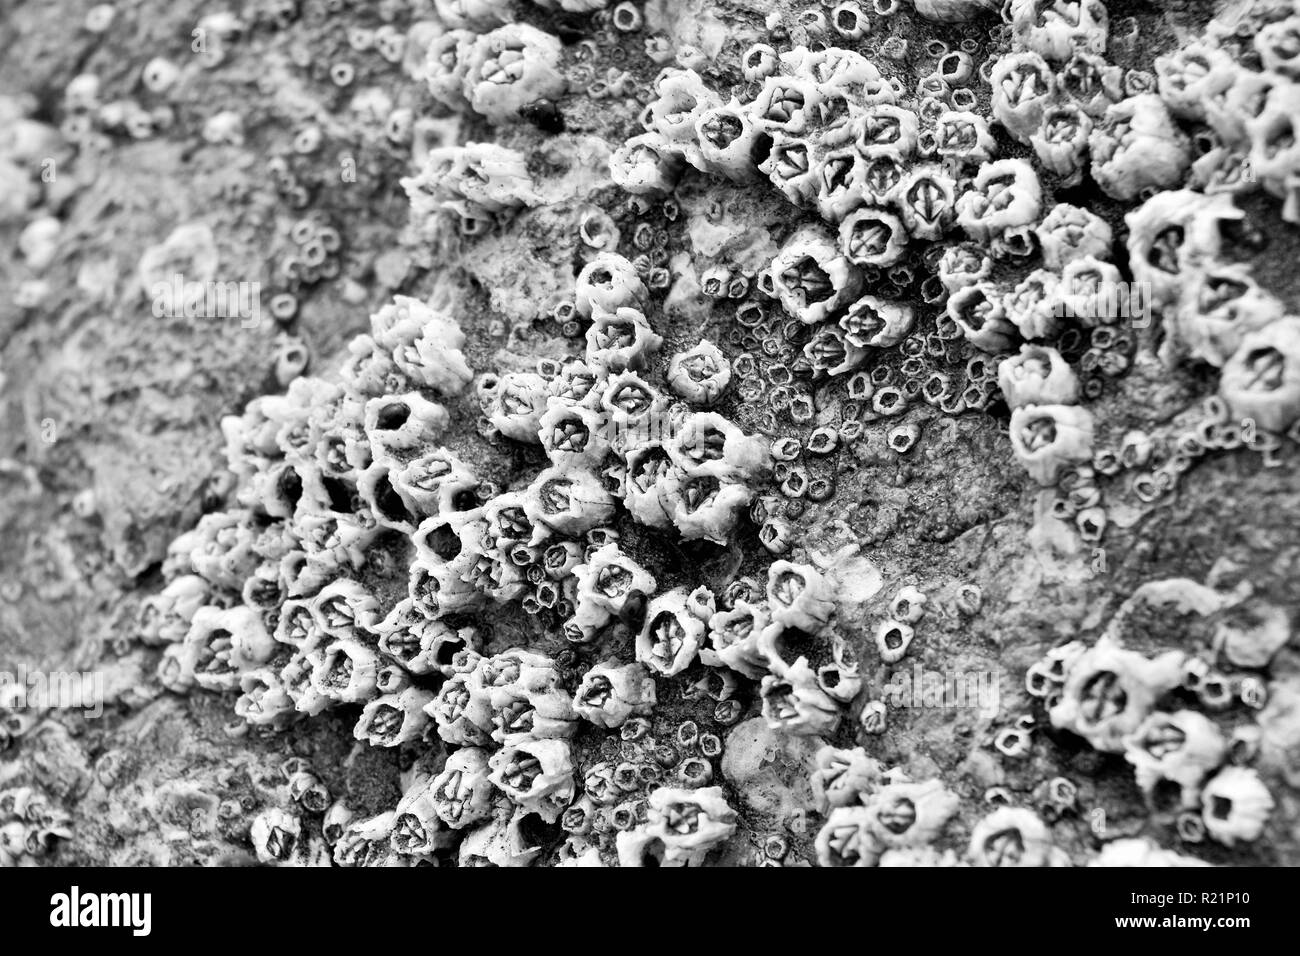 close up of barnacles on a rock during low tide in black and white Stock Photo